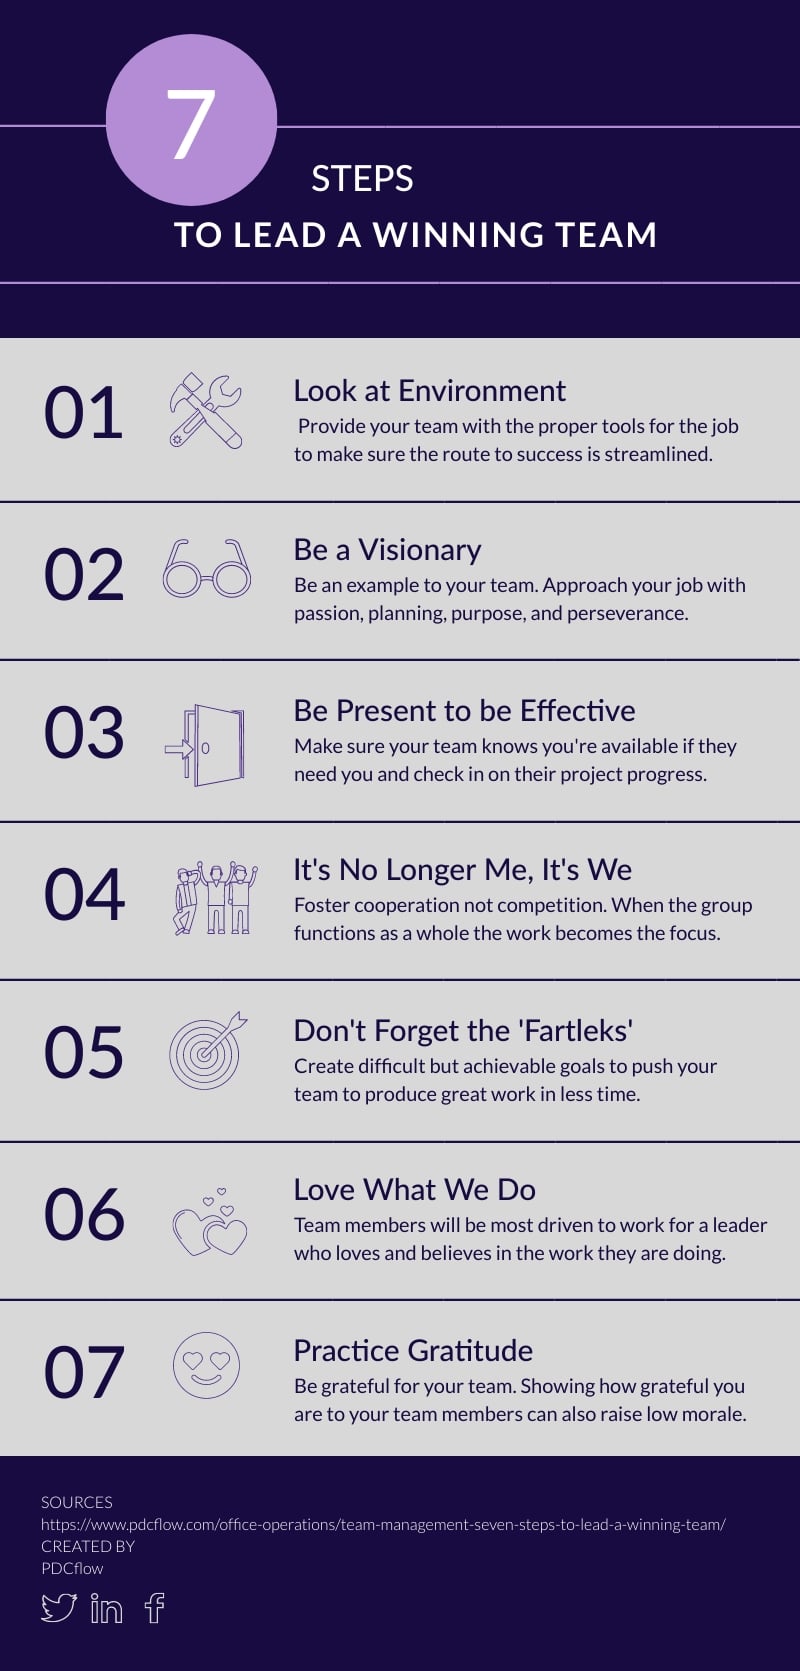 Seven Steps to Lead a Winning Team Infographic